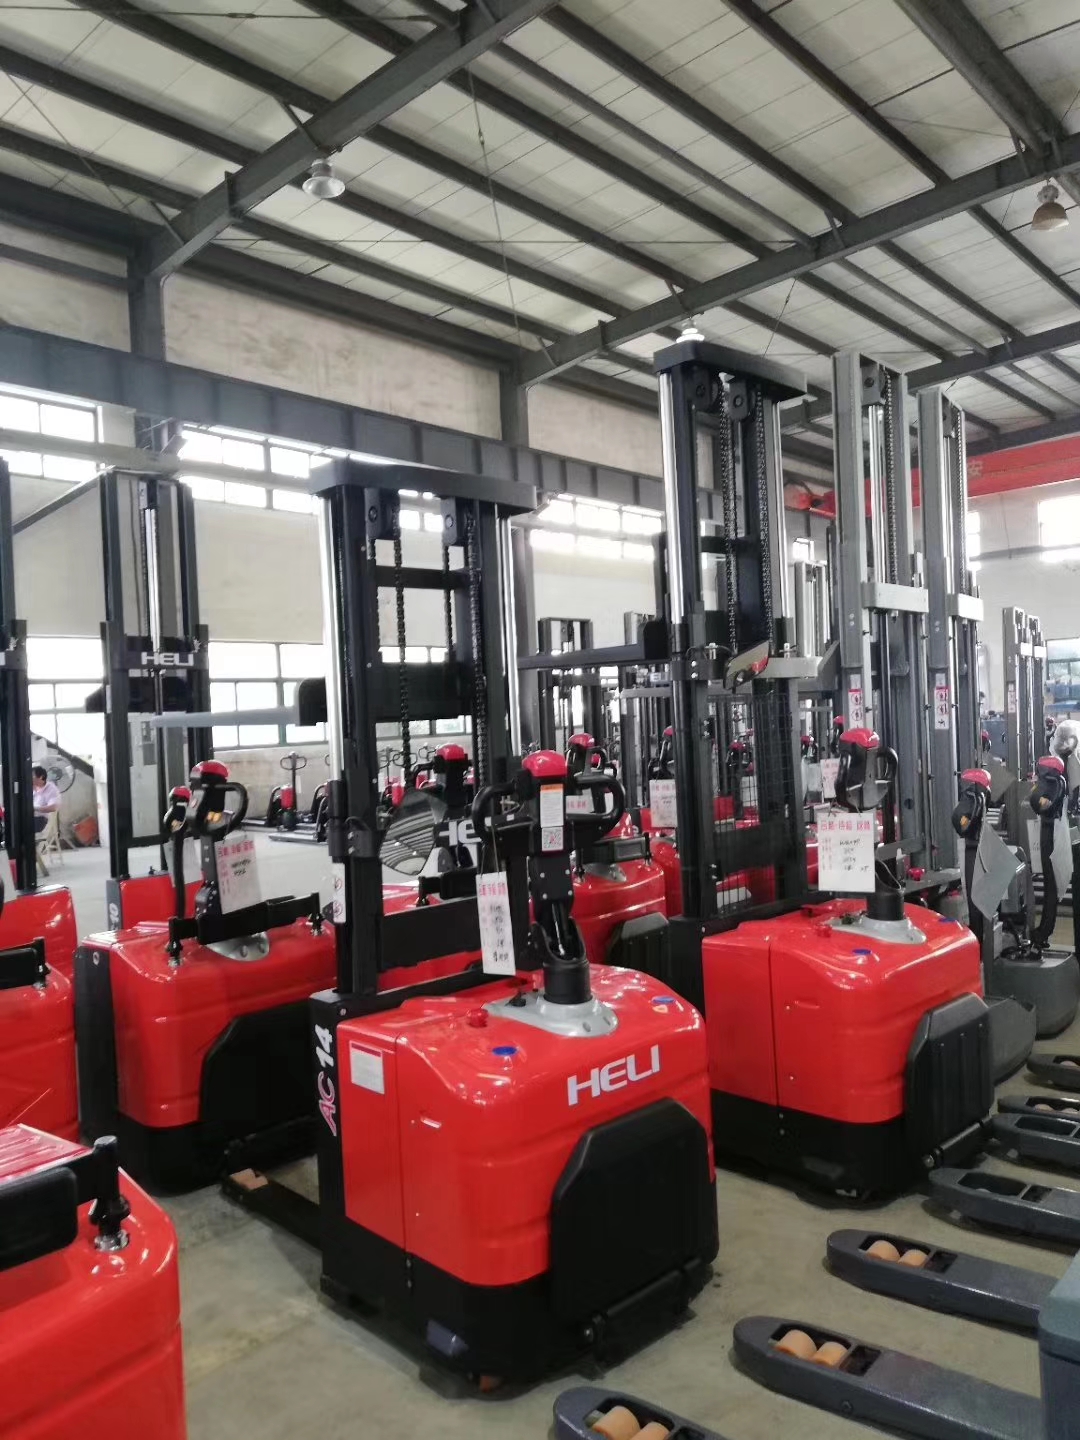 3T Electric Wide Forklift Stacker